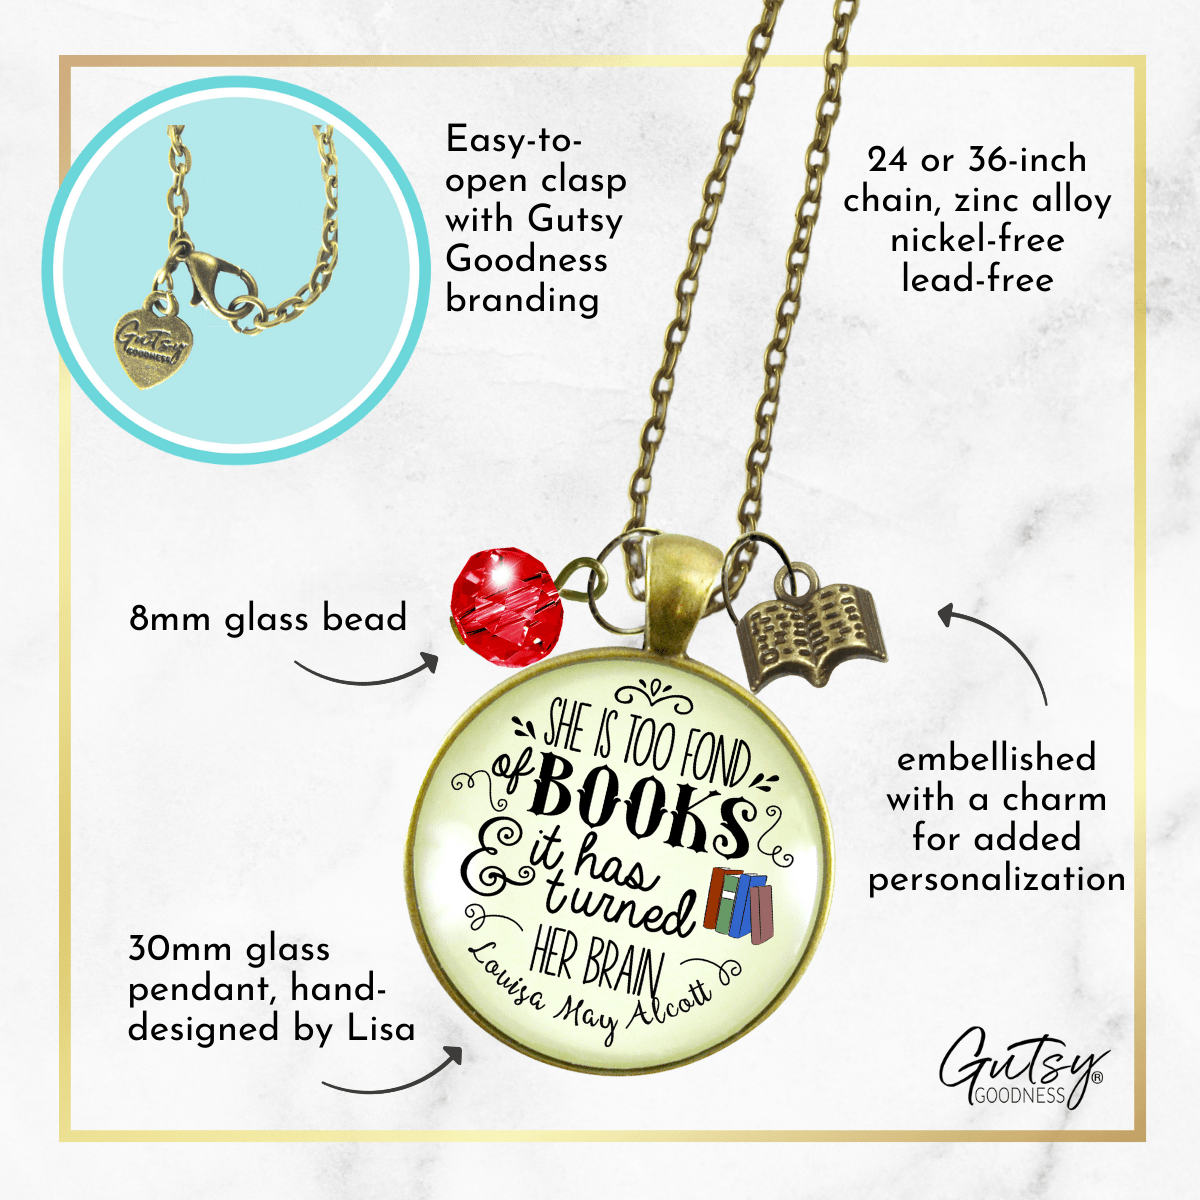 Gutsy Goodness Book Necklace She Is Too Fond Literary Louisa May Alcott Jewelry Blue Charm - Gutsy Goodness Handmade Jewelry;Book Necklace She Is Too Fond Literary Louisa May Alcott Jewelry Blue Charm - Gutsy Goodness Handmade Jewelry Gifts